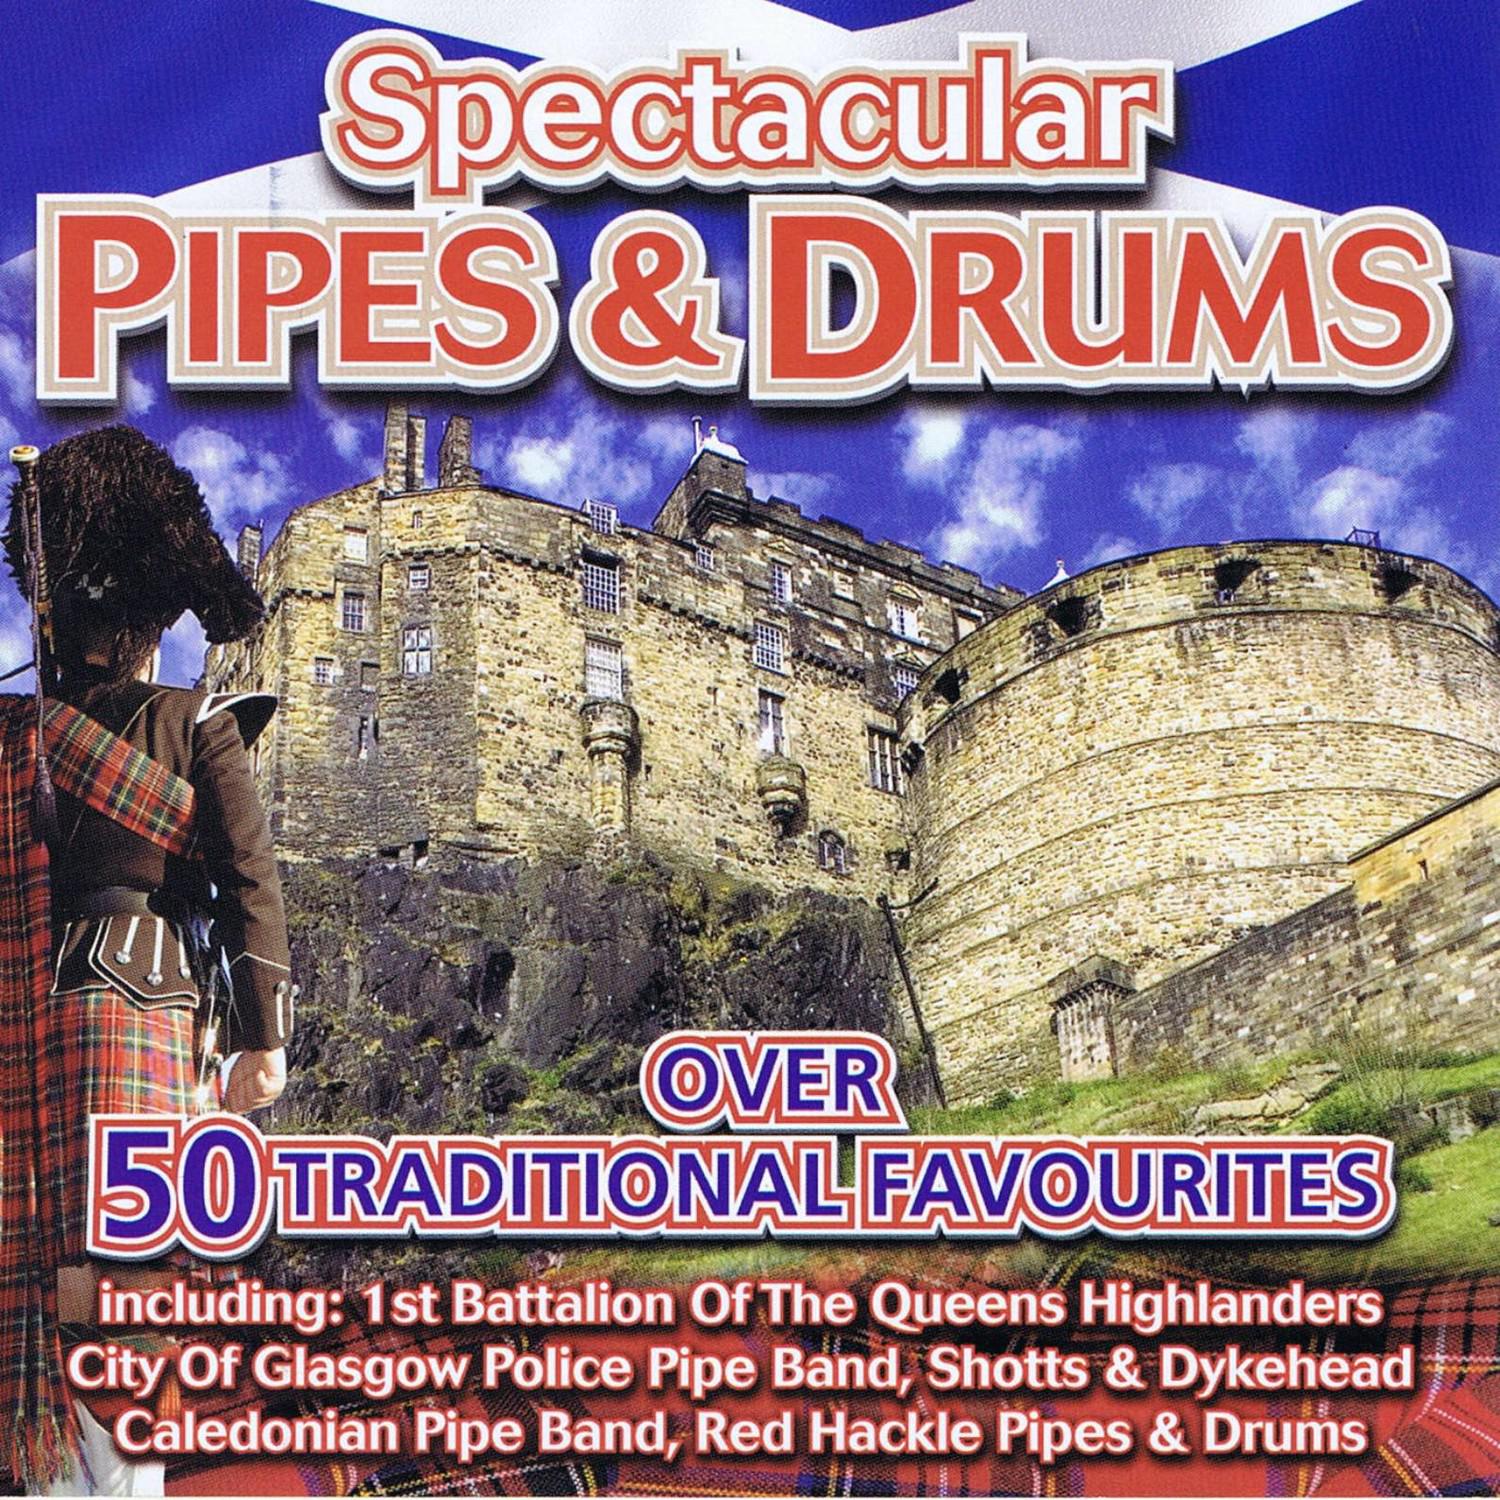 Greenwood Drive / Mhairi Ban Og / The Hills of Glenorchy / City of Dundee Police Pipe Band